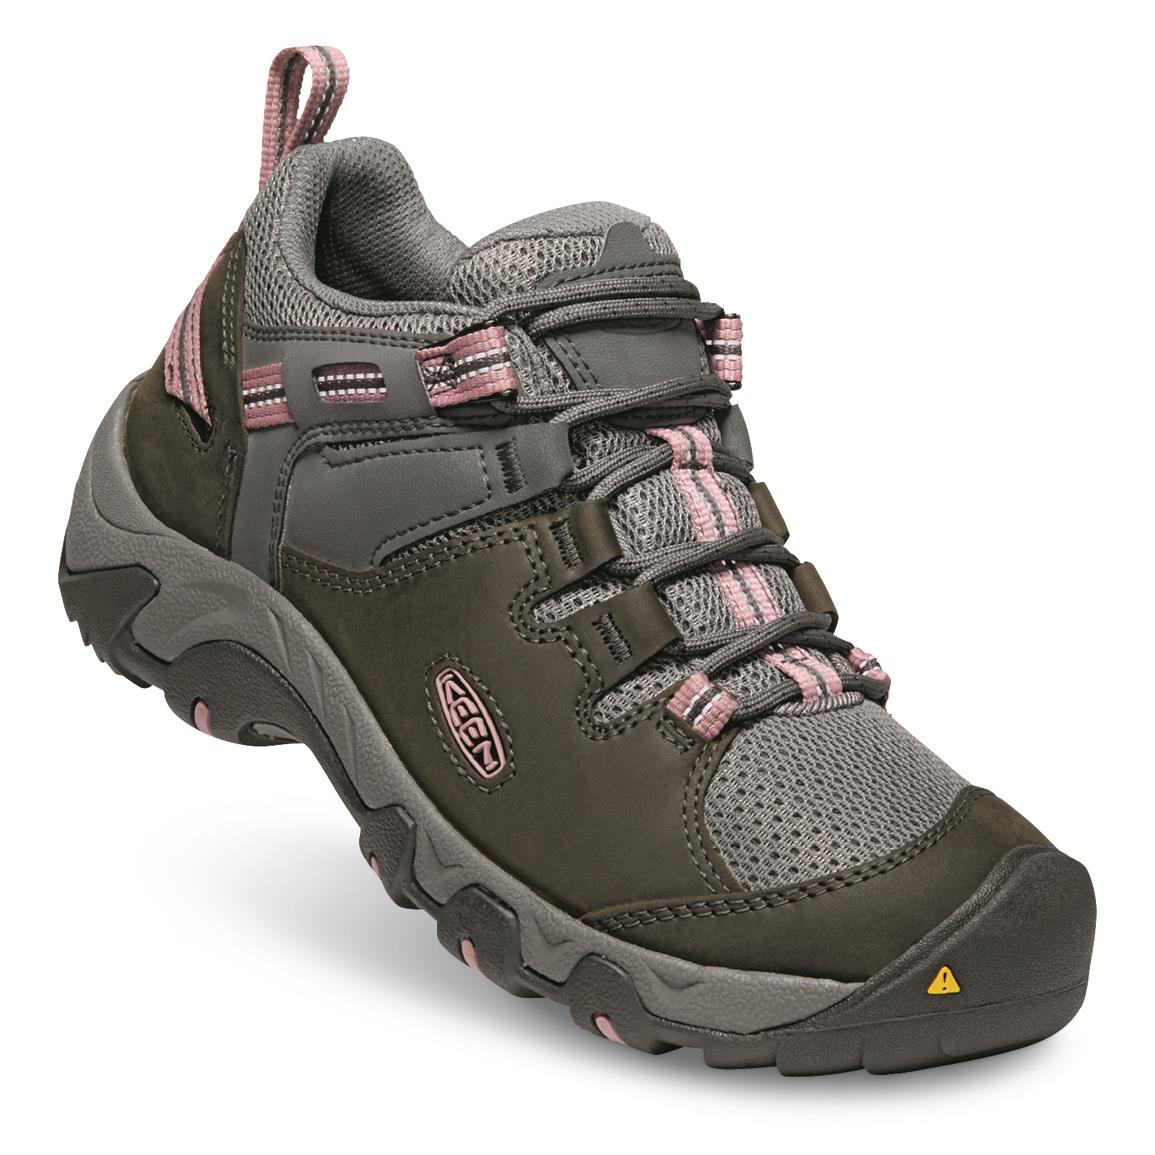 KEEN Women's Steens Vent Hiking Shoes, Magnet/nostalgia Rose